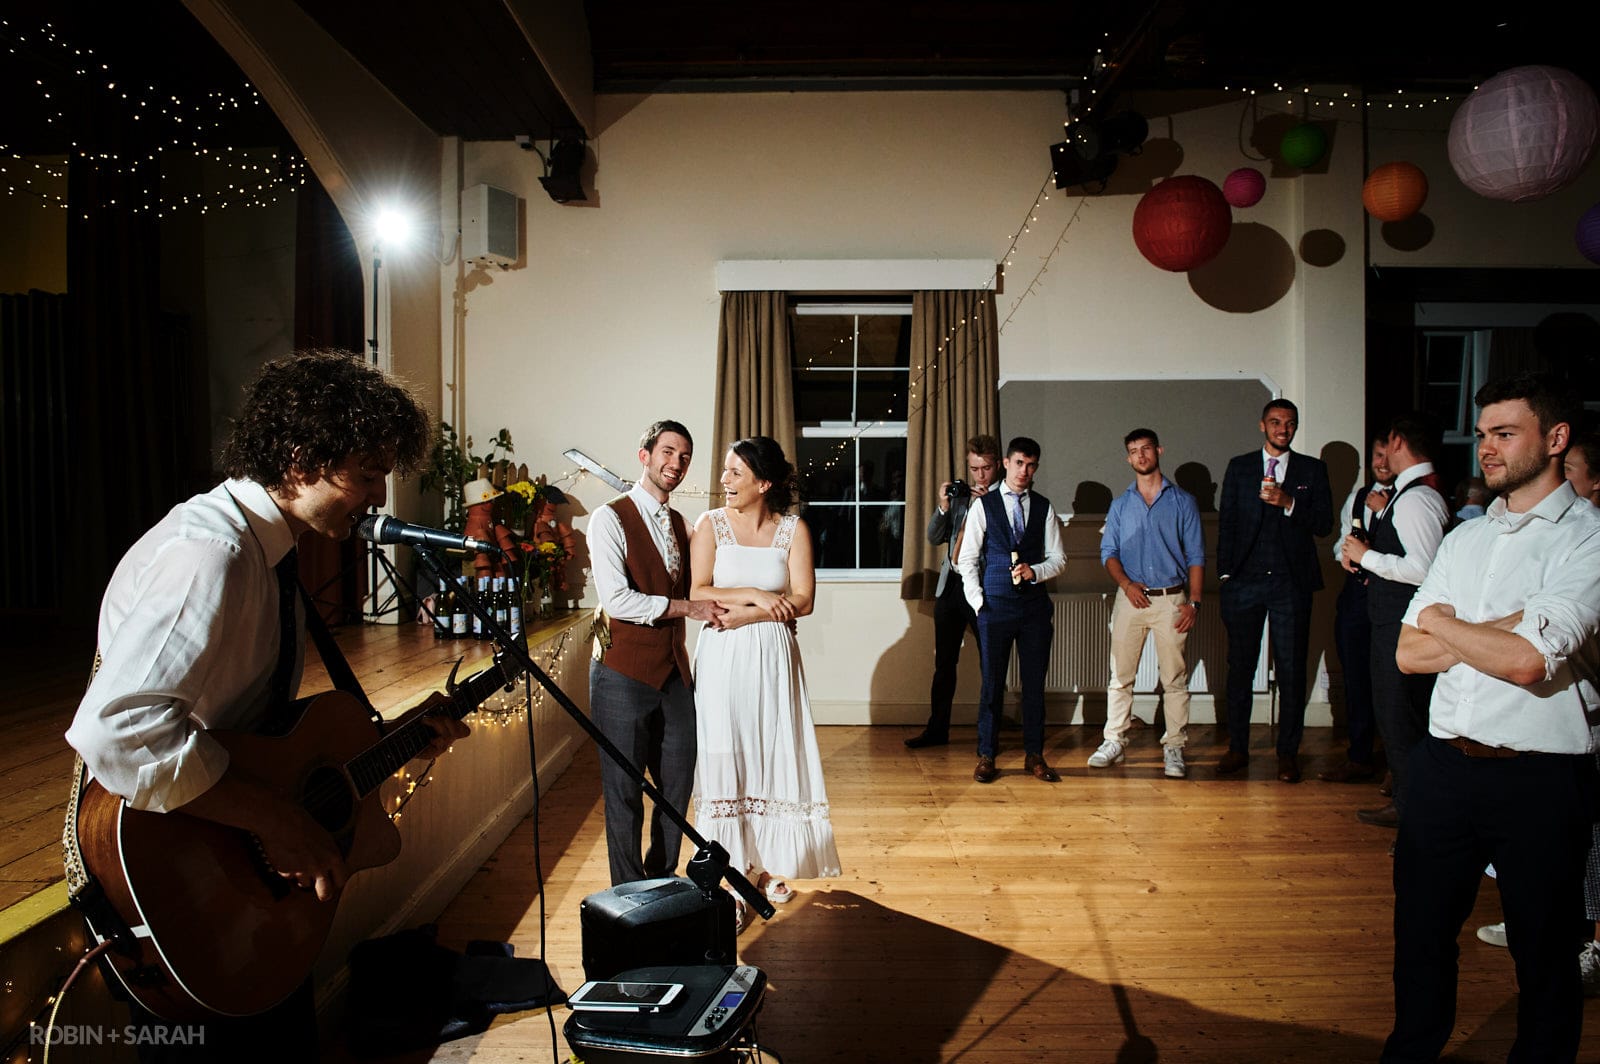 Bride and guests watch as musician performs live in village hall